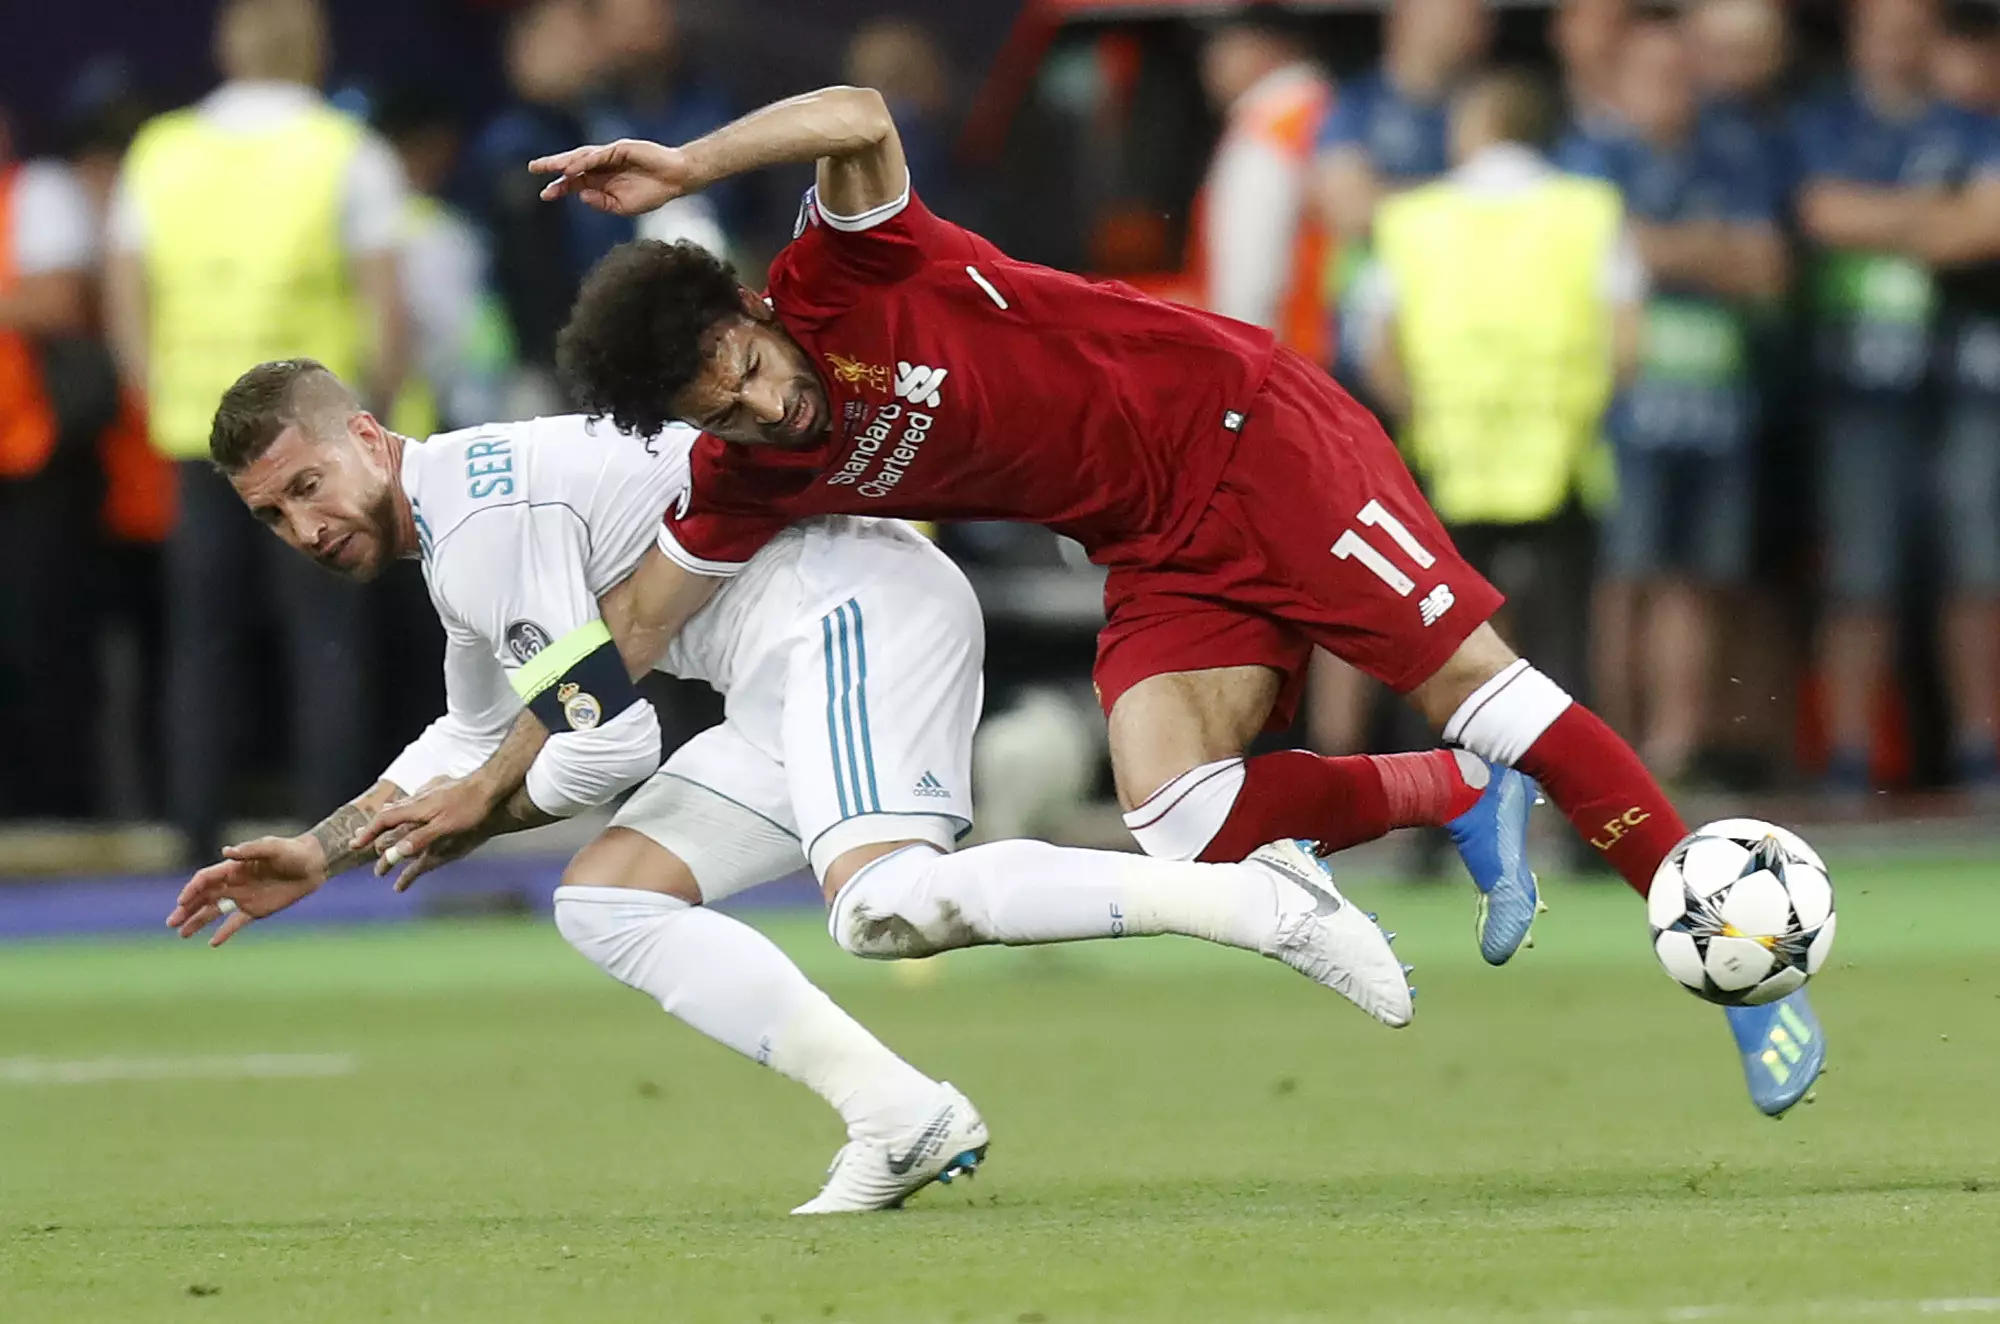 Of course Salah's time in the final didn't last long. Image: PA Images